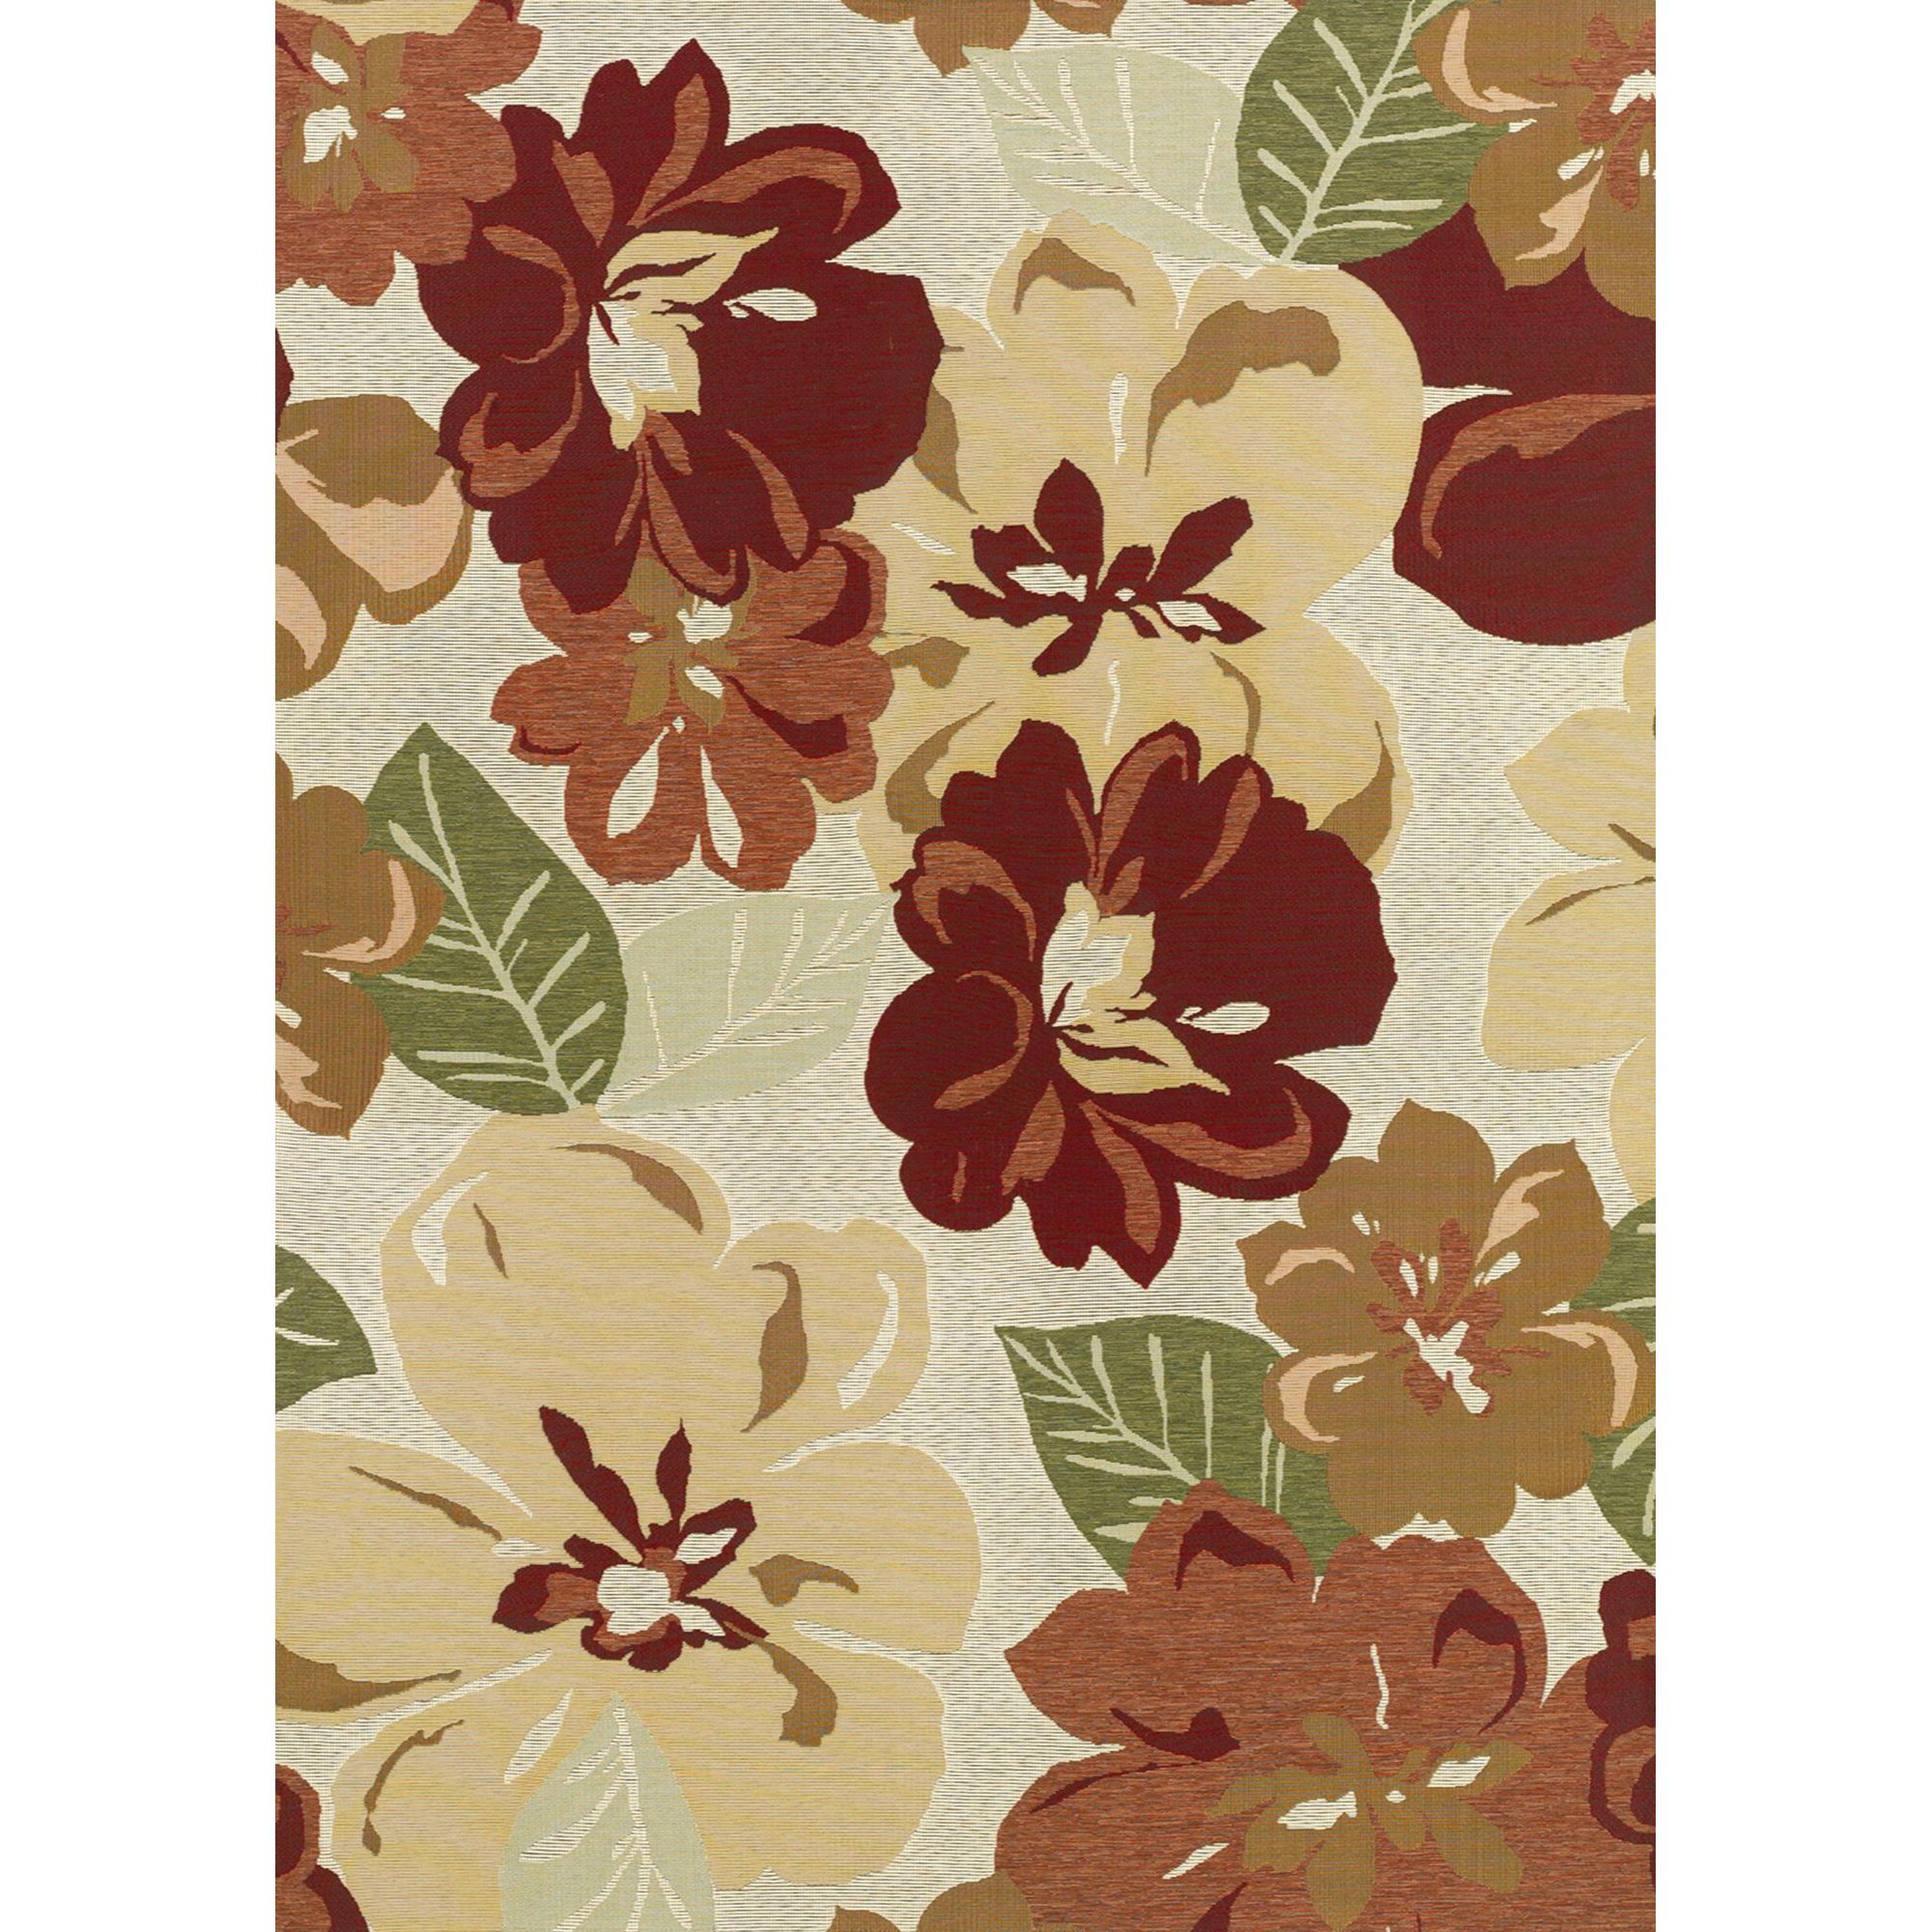 Couristan 8.1' x 11.1' Red and Beige Floral Rectangular Outdoor Area Throw Rug